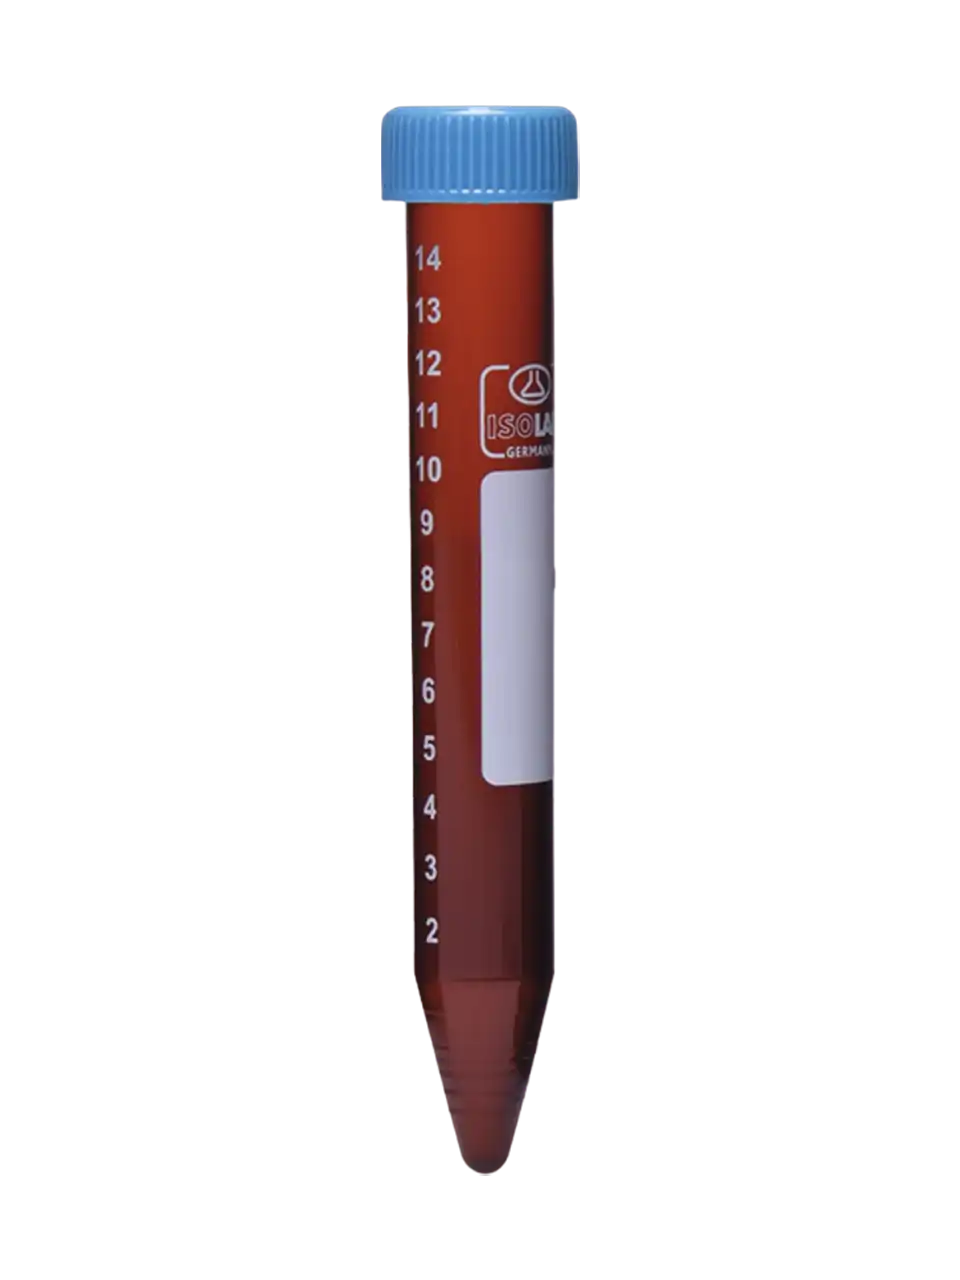 Centrifuge (Falcon) Tube, P.P, Amber, Screw Cap, Conical Bottom, W/O Skirt, Autoclavable, Sterile (Aseptic), 15 ml Volume, 50 apcs/pack